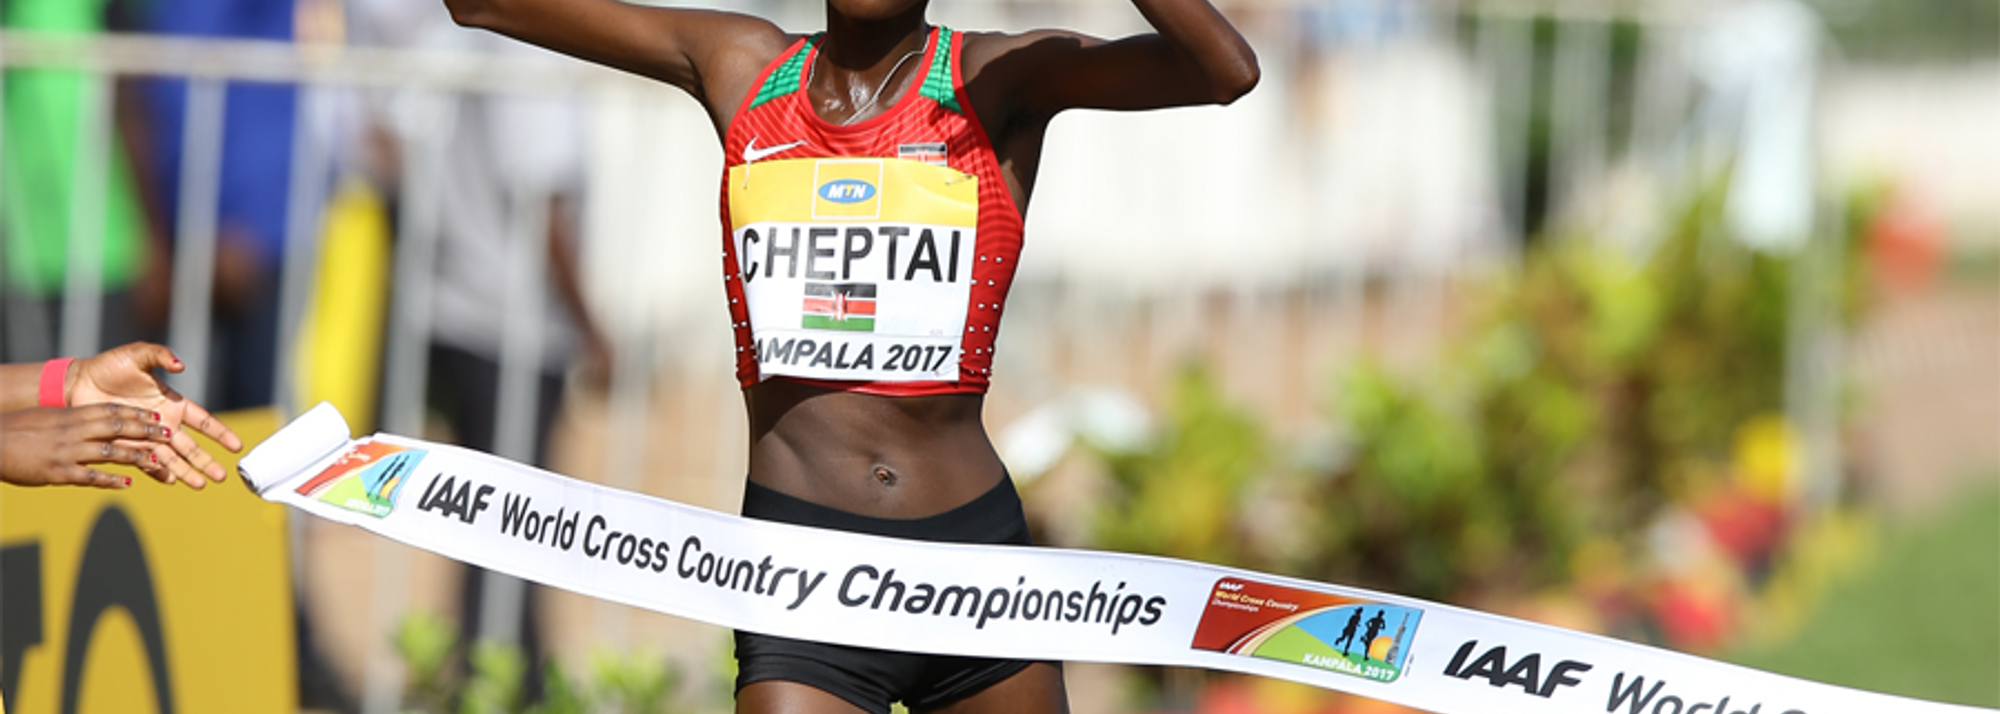 Capping an unprecedented display of team dominance, Irene Chepet Cheptai led a mighty Kenyan senior women’s squad to the first-ever top-six sweep at a World Cross Country Championships.